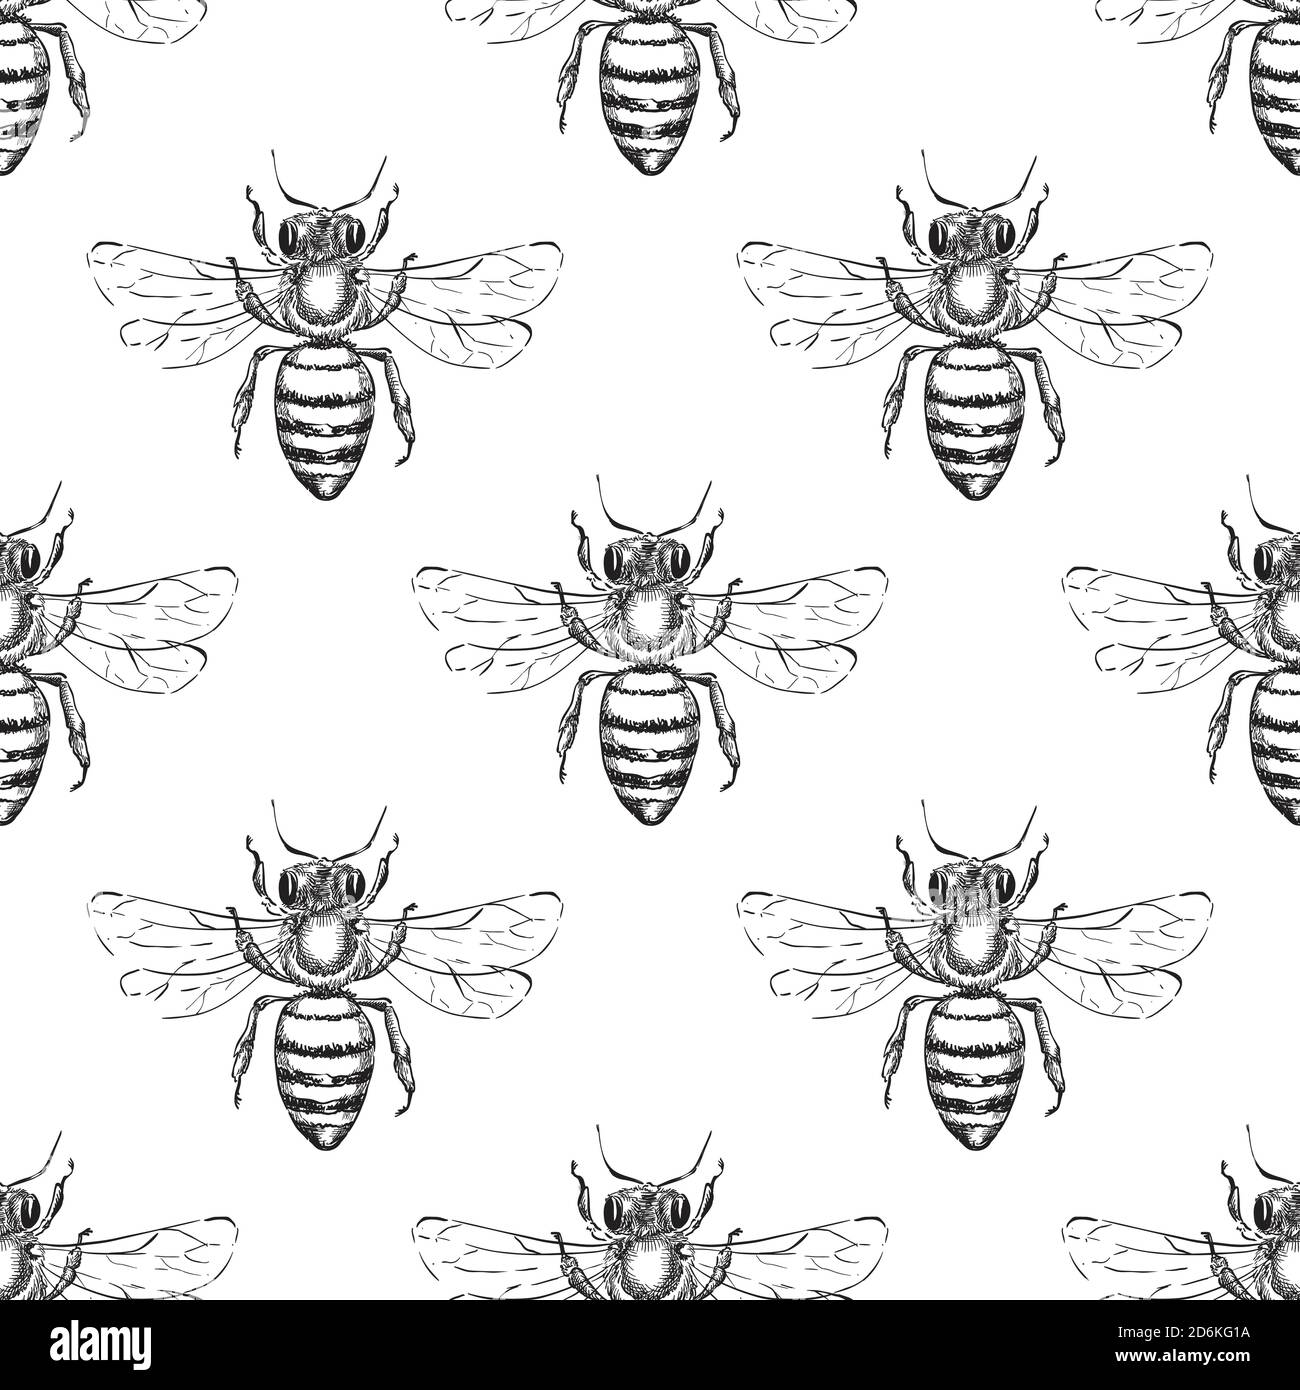 Bee seamless vector pattern. Sketch hand drawn illustration of honeybee. Fashion textile print or honey packaging background design. Stock Vector